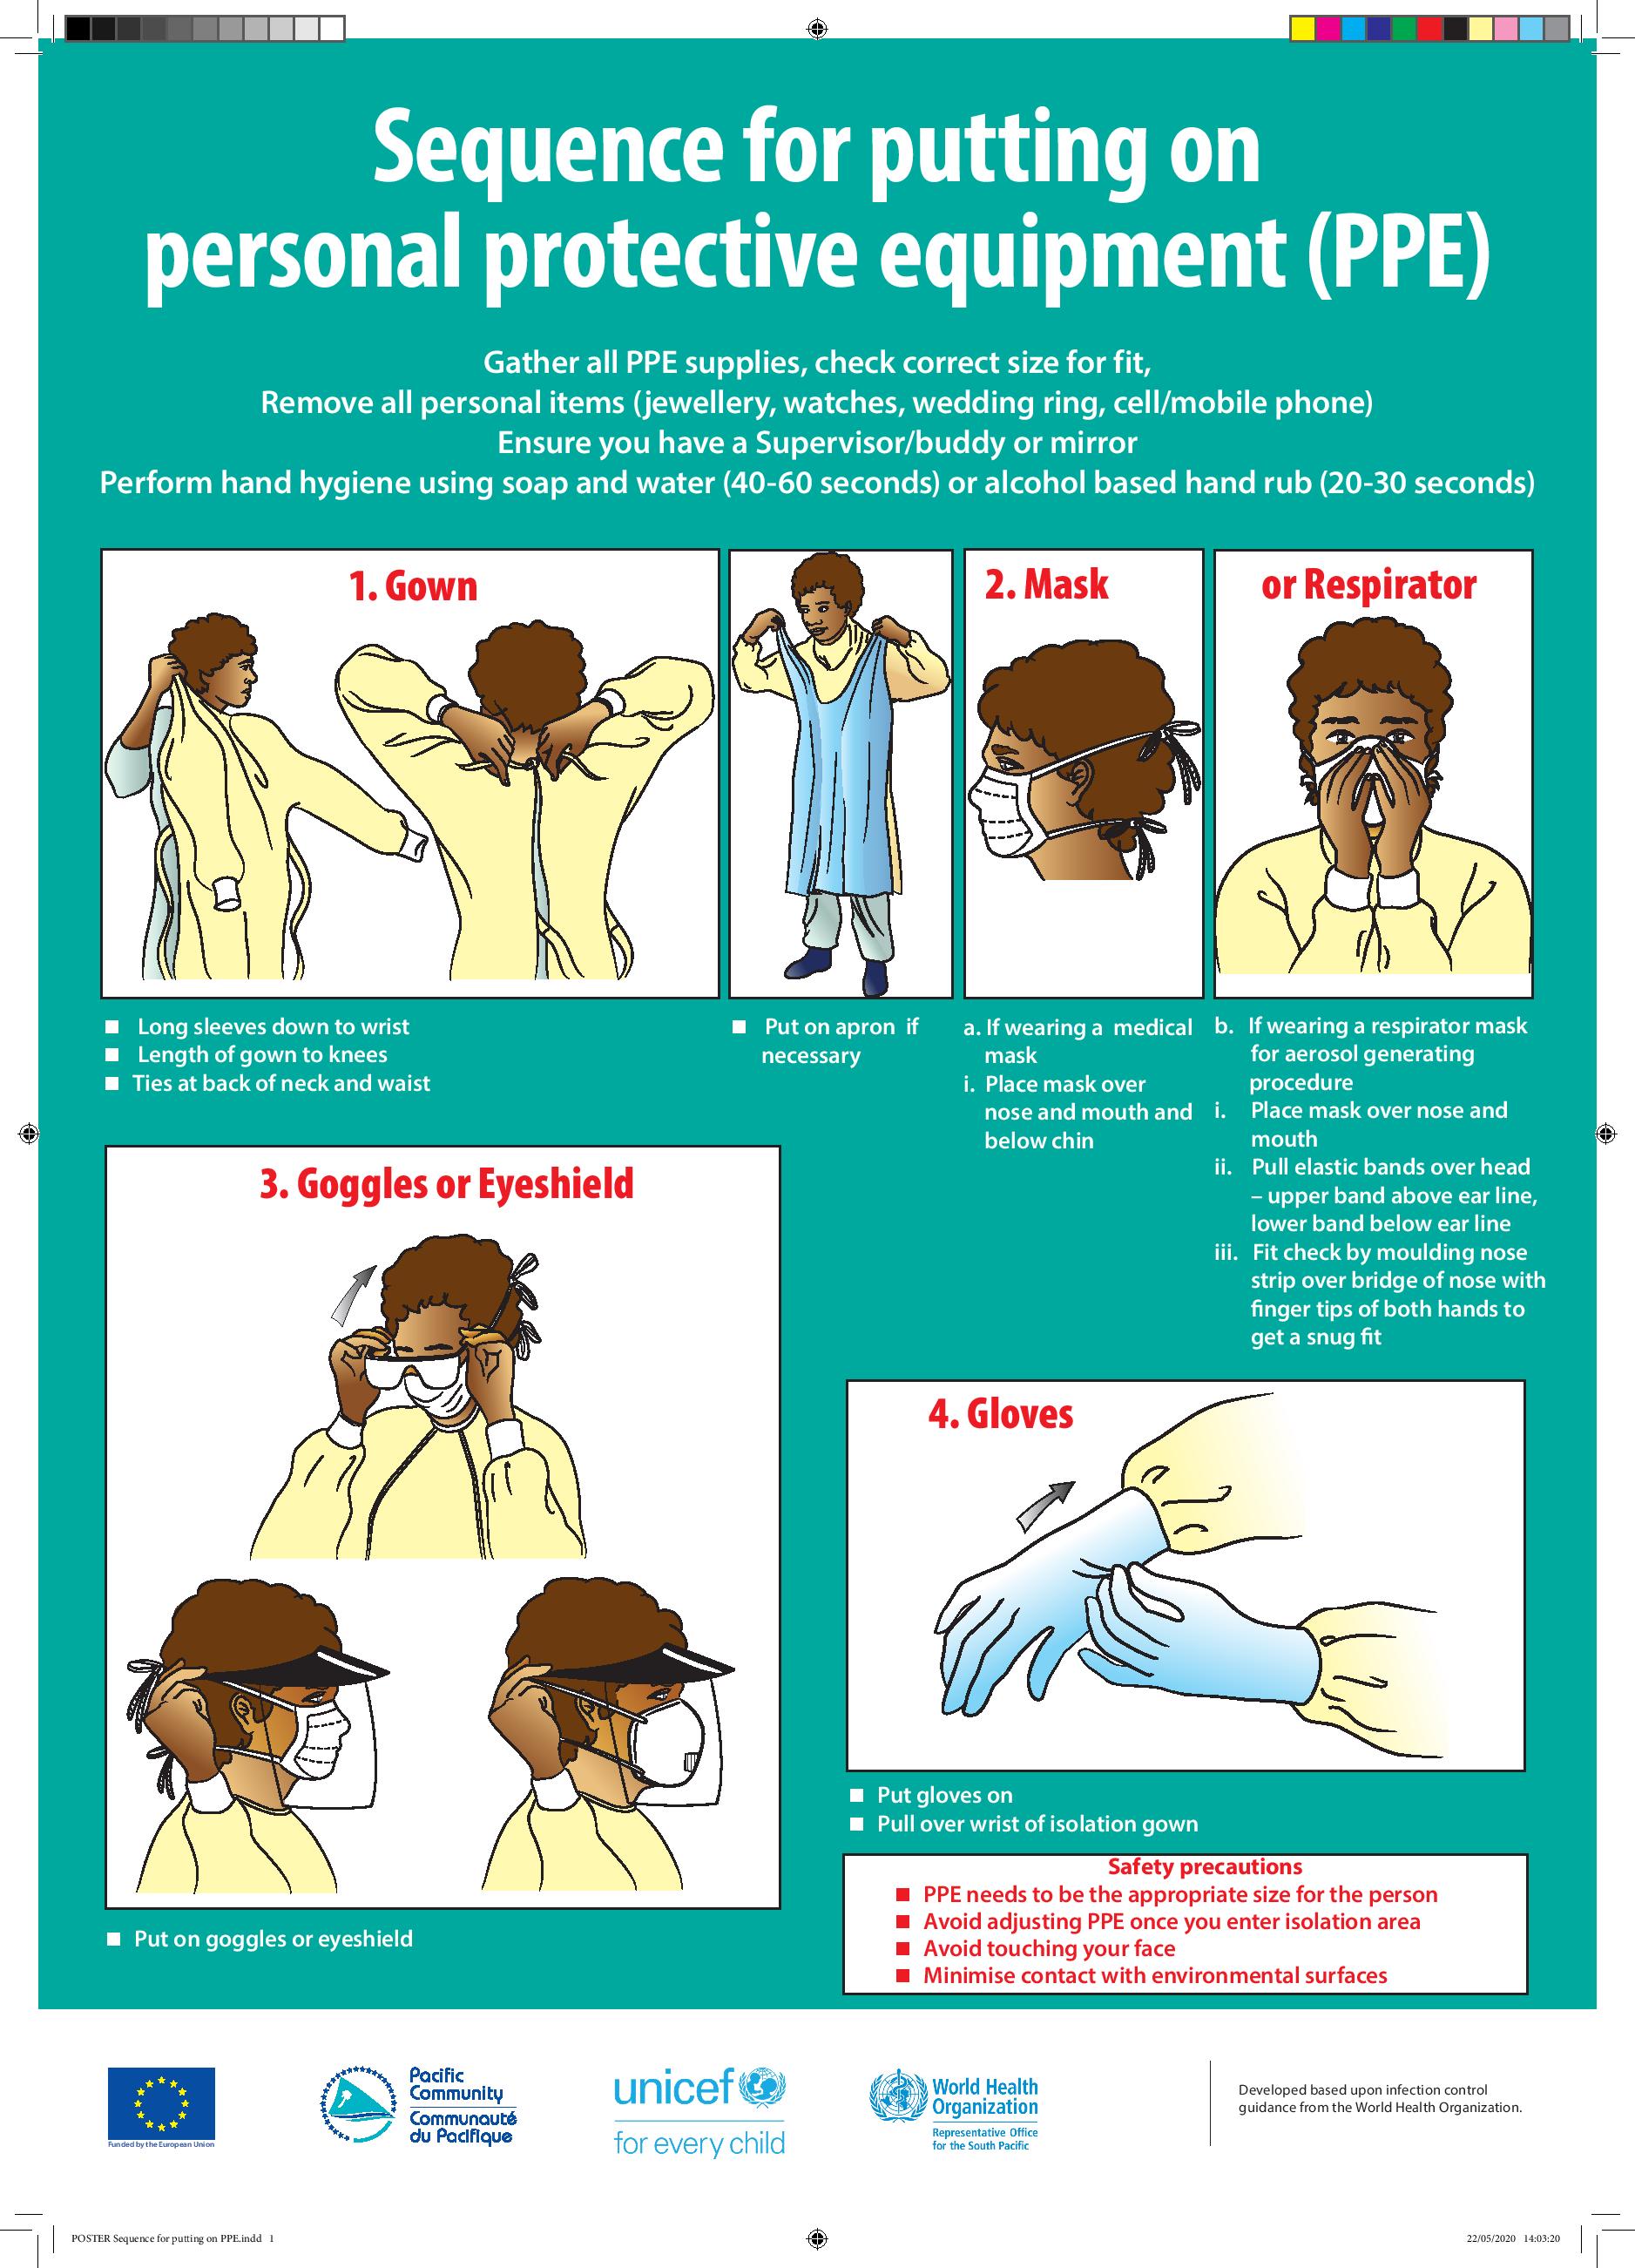 Sequence for putting on personal protective equipment (PPE)